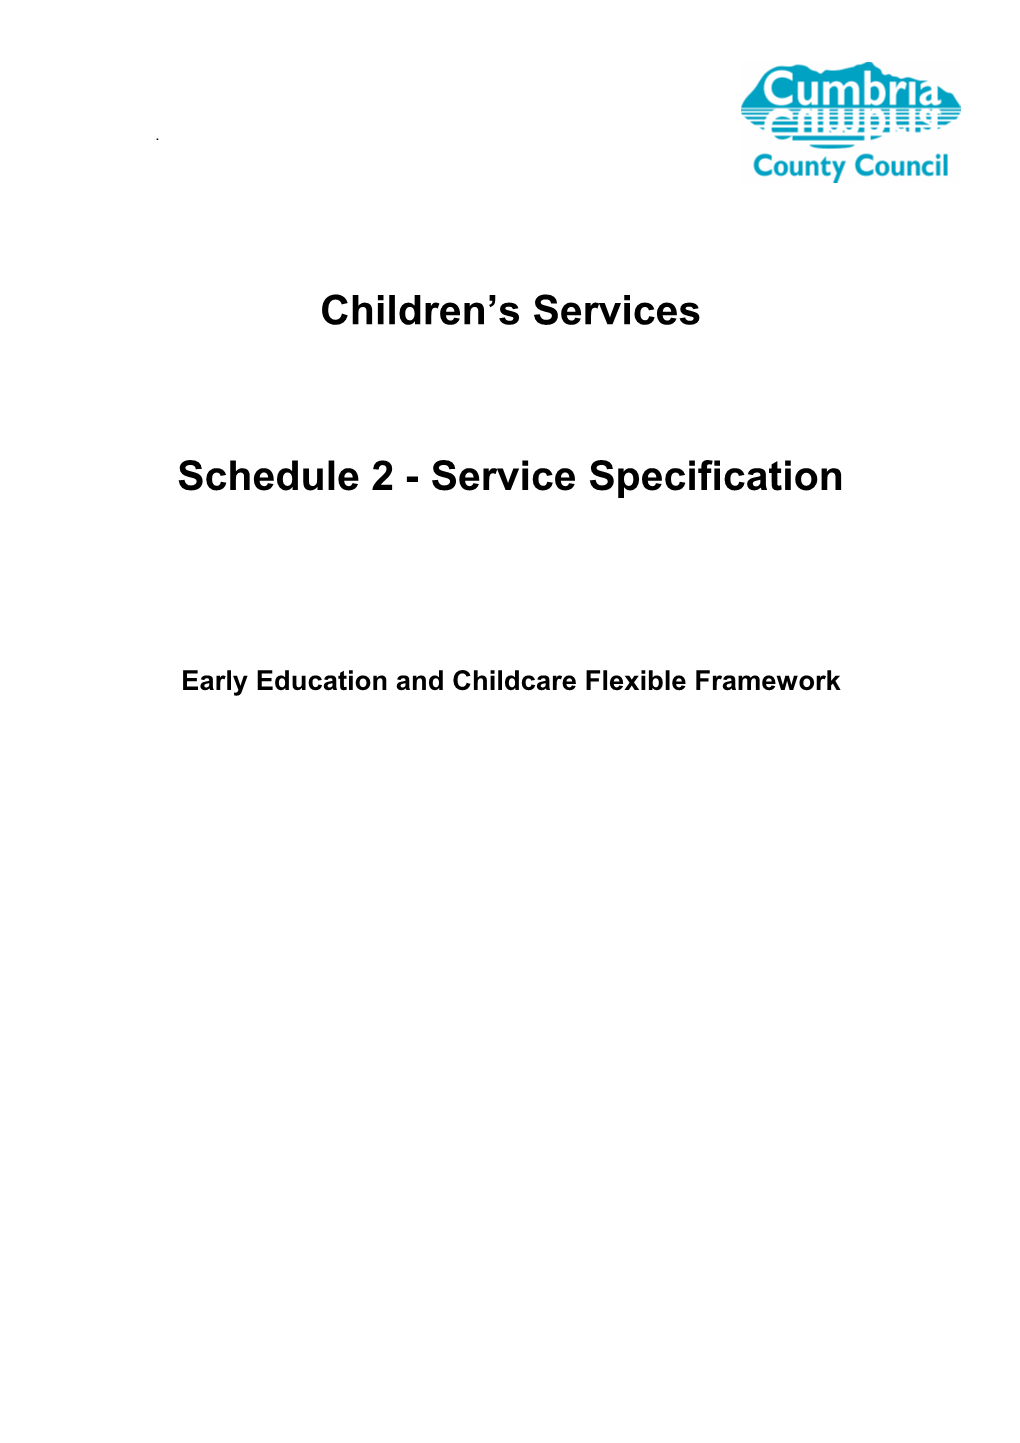 Early Education and Childcare Flexible Framework